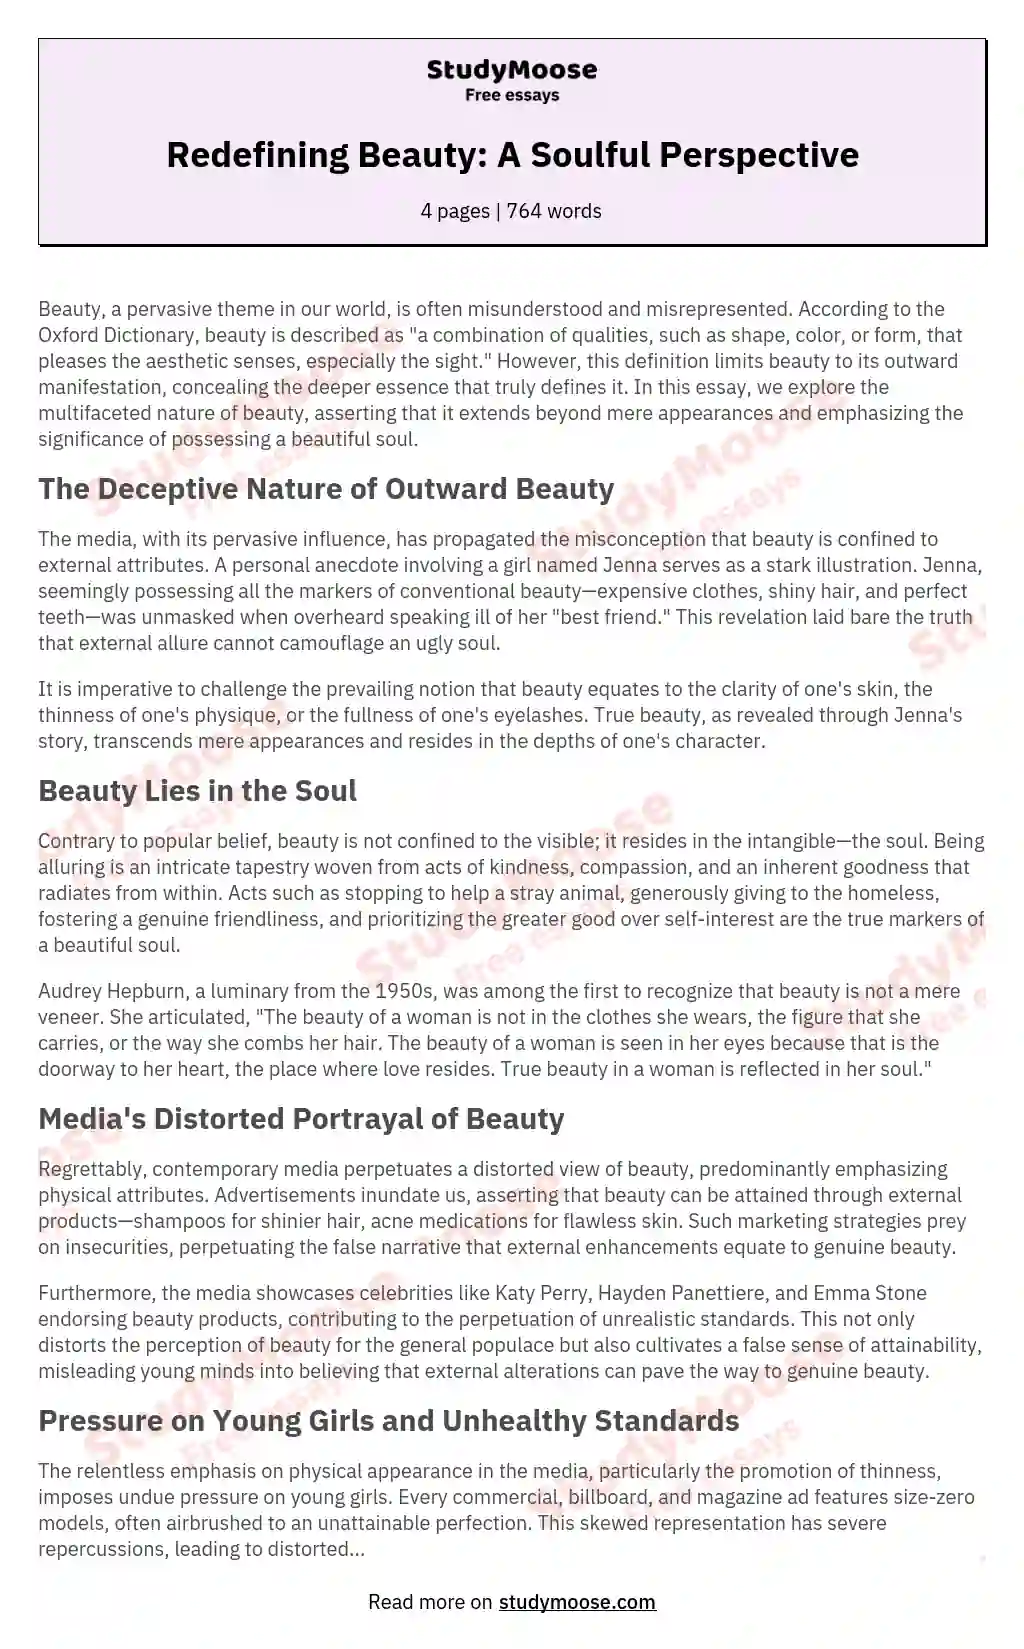 what is beauty definition essay